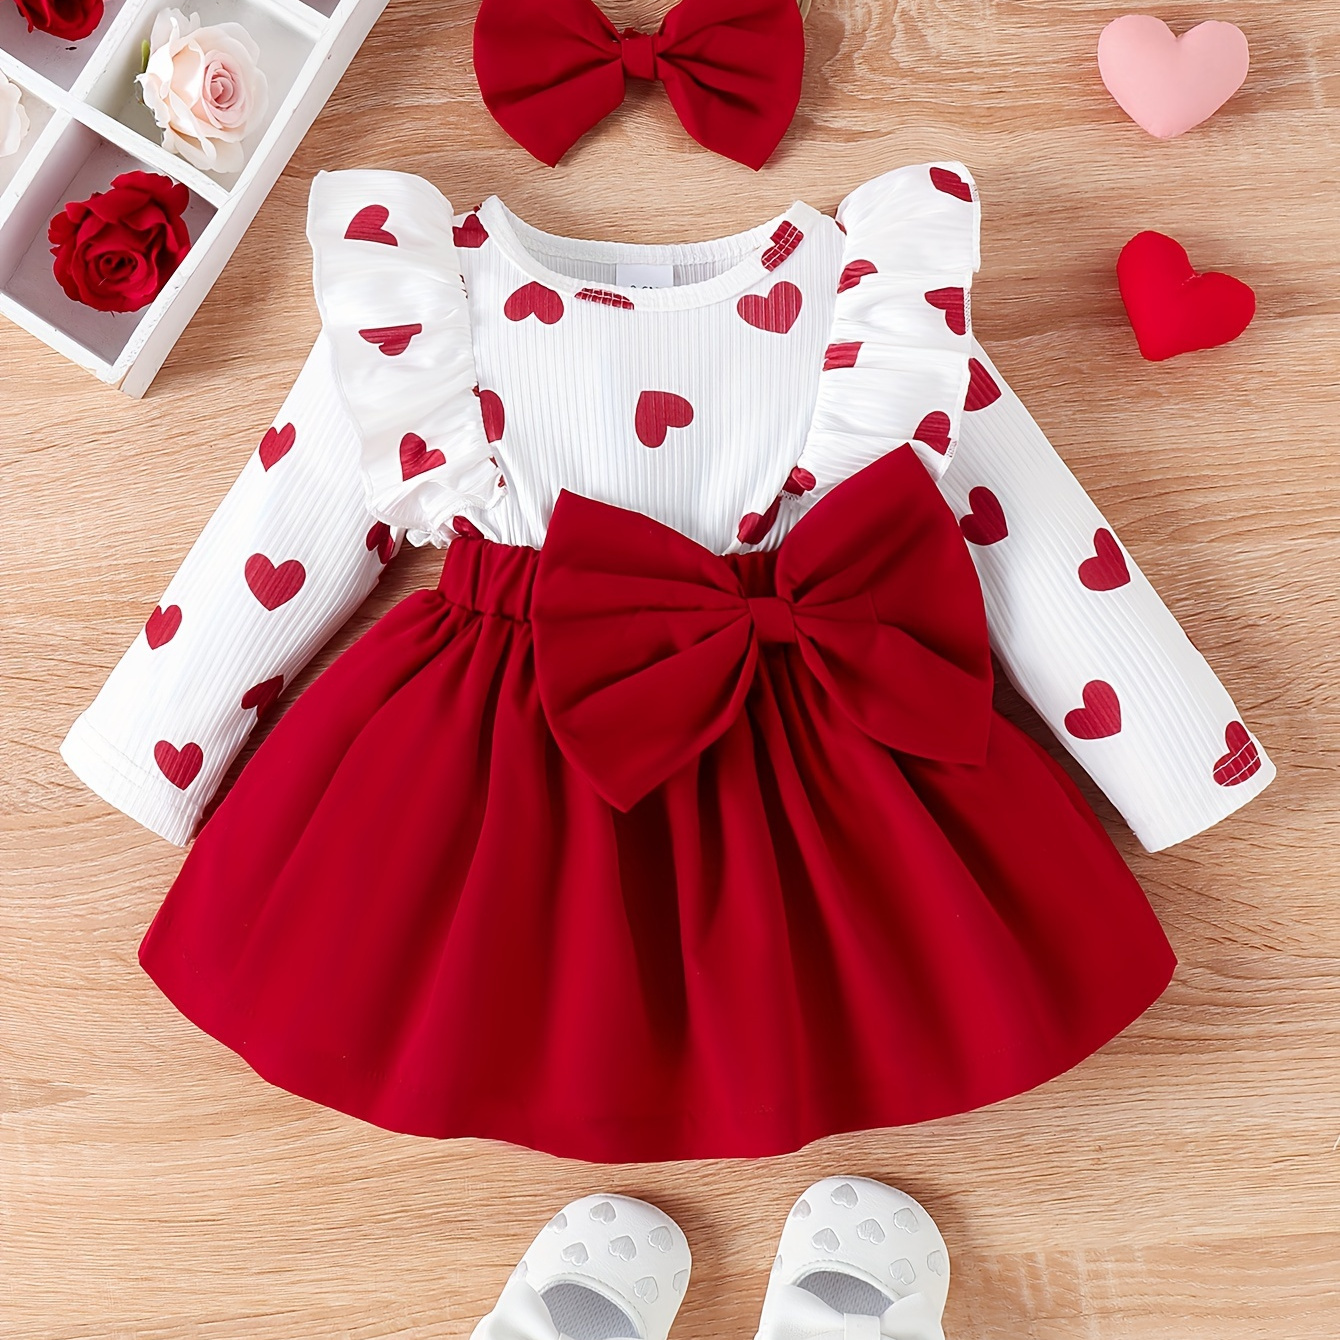 

Baby Girls Exquisite & Comfortable Love Print Long Sleeve Color Block Dress For Banquet